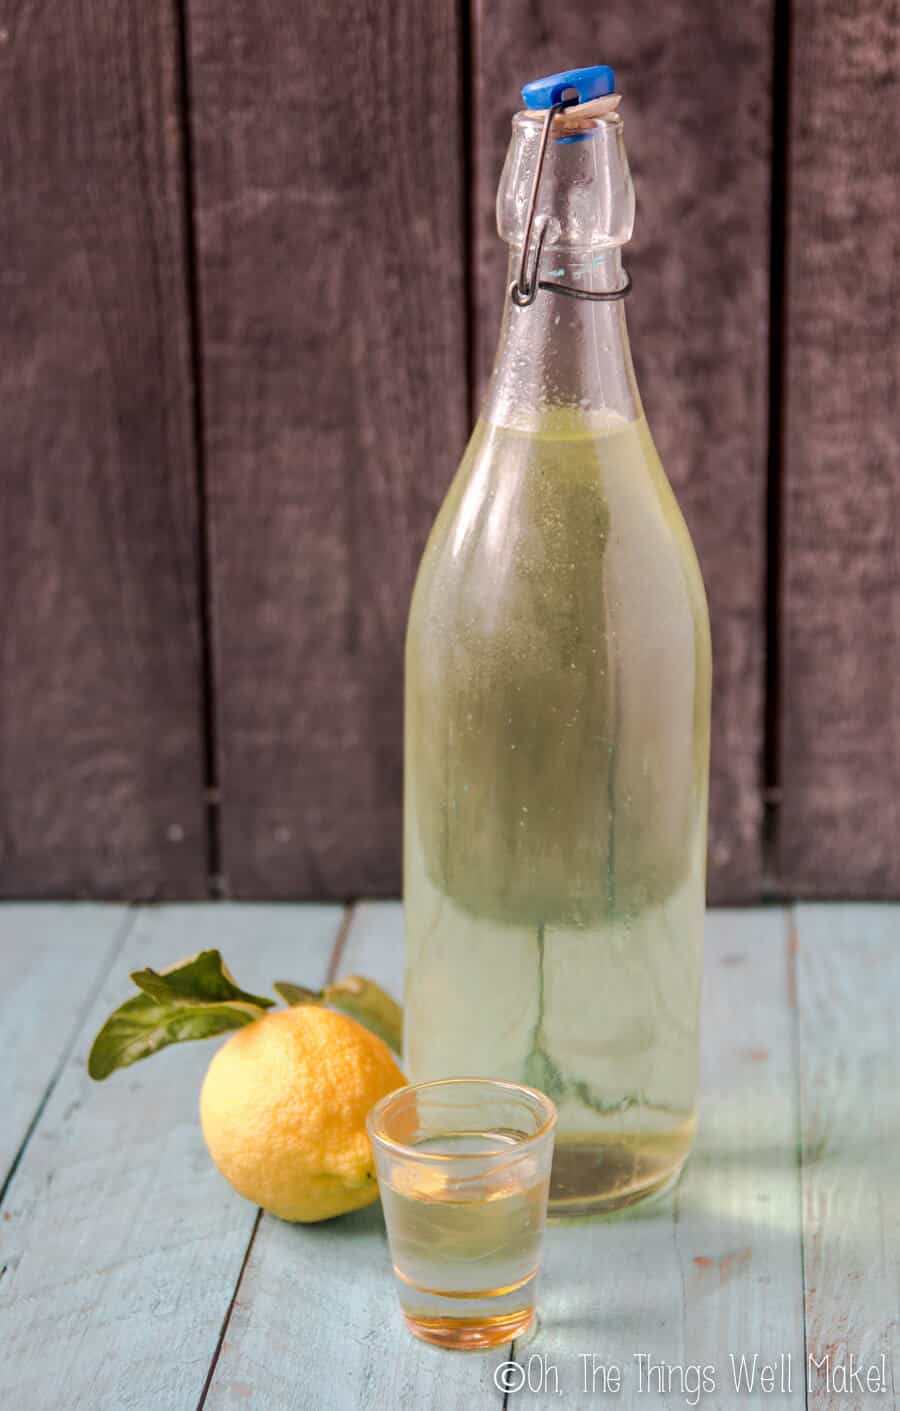 A bottle of homemade limoncello that is paler in color